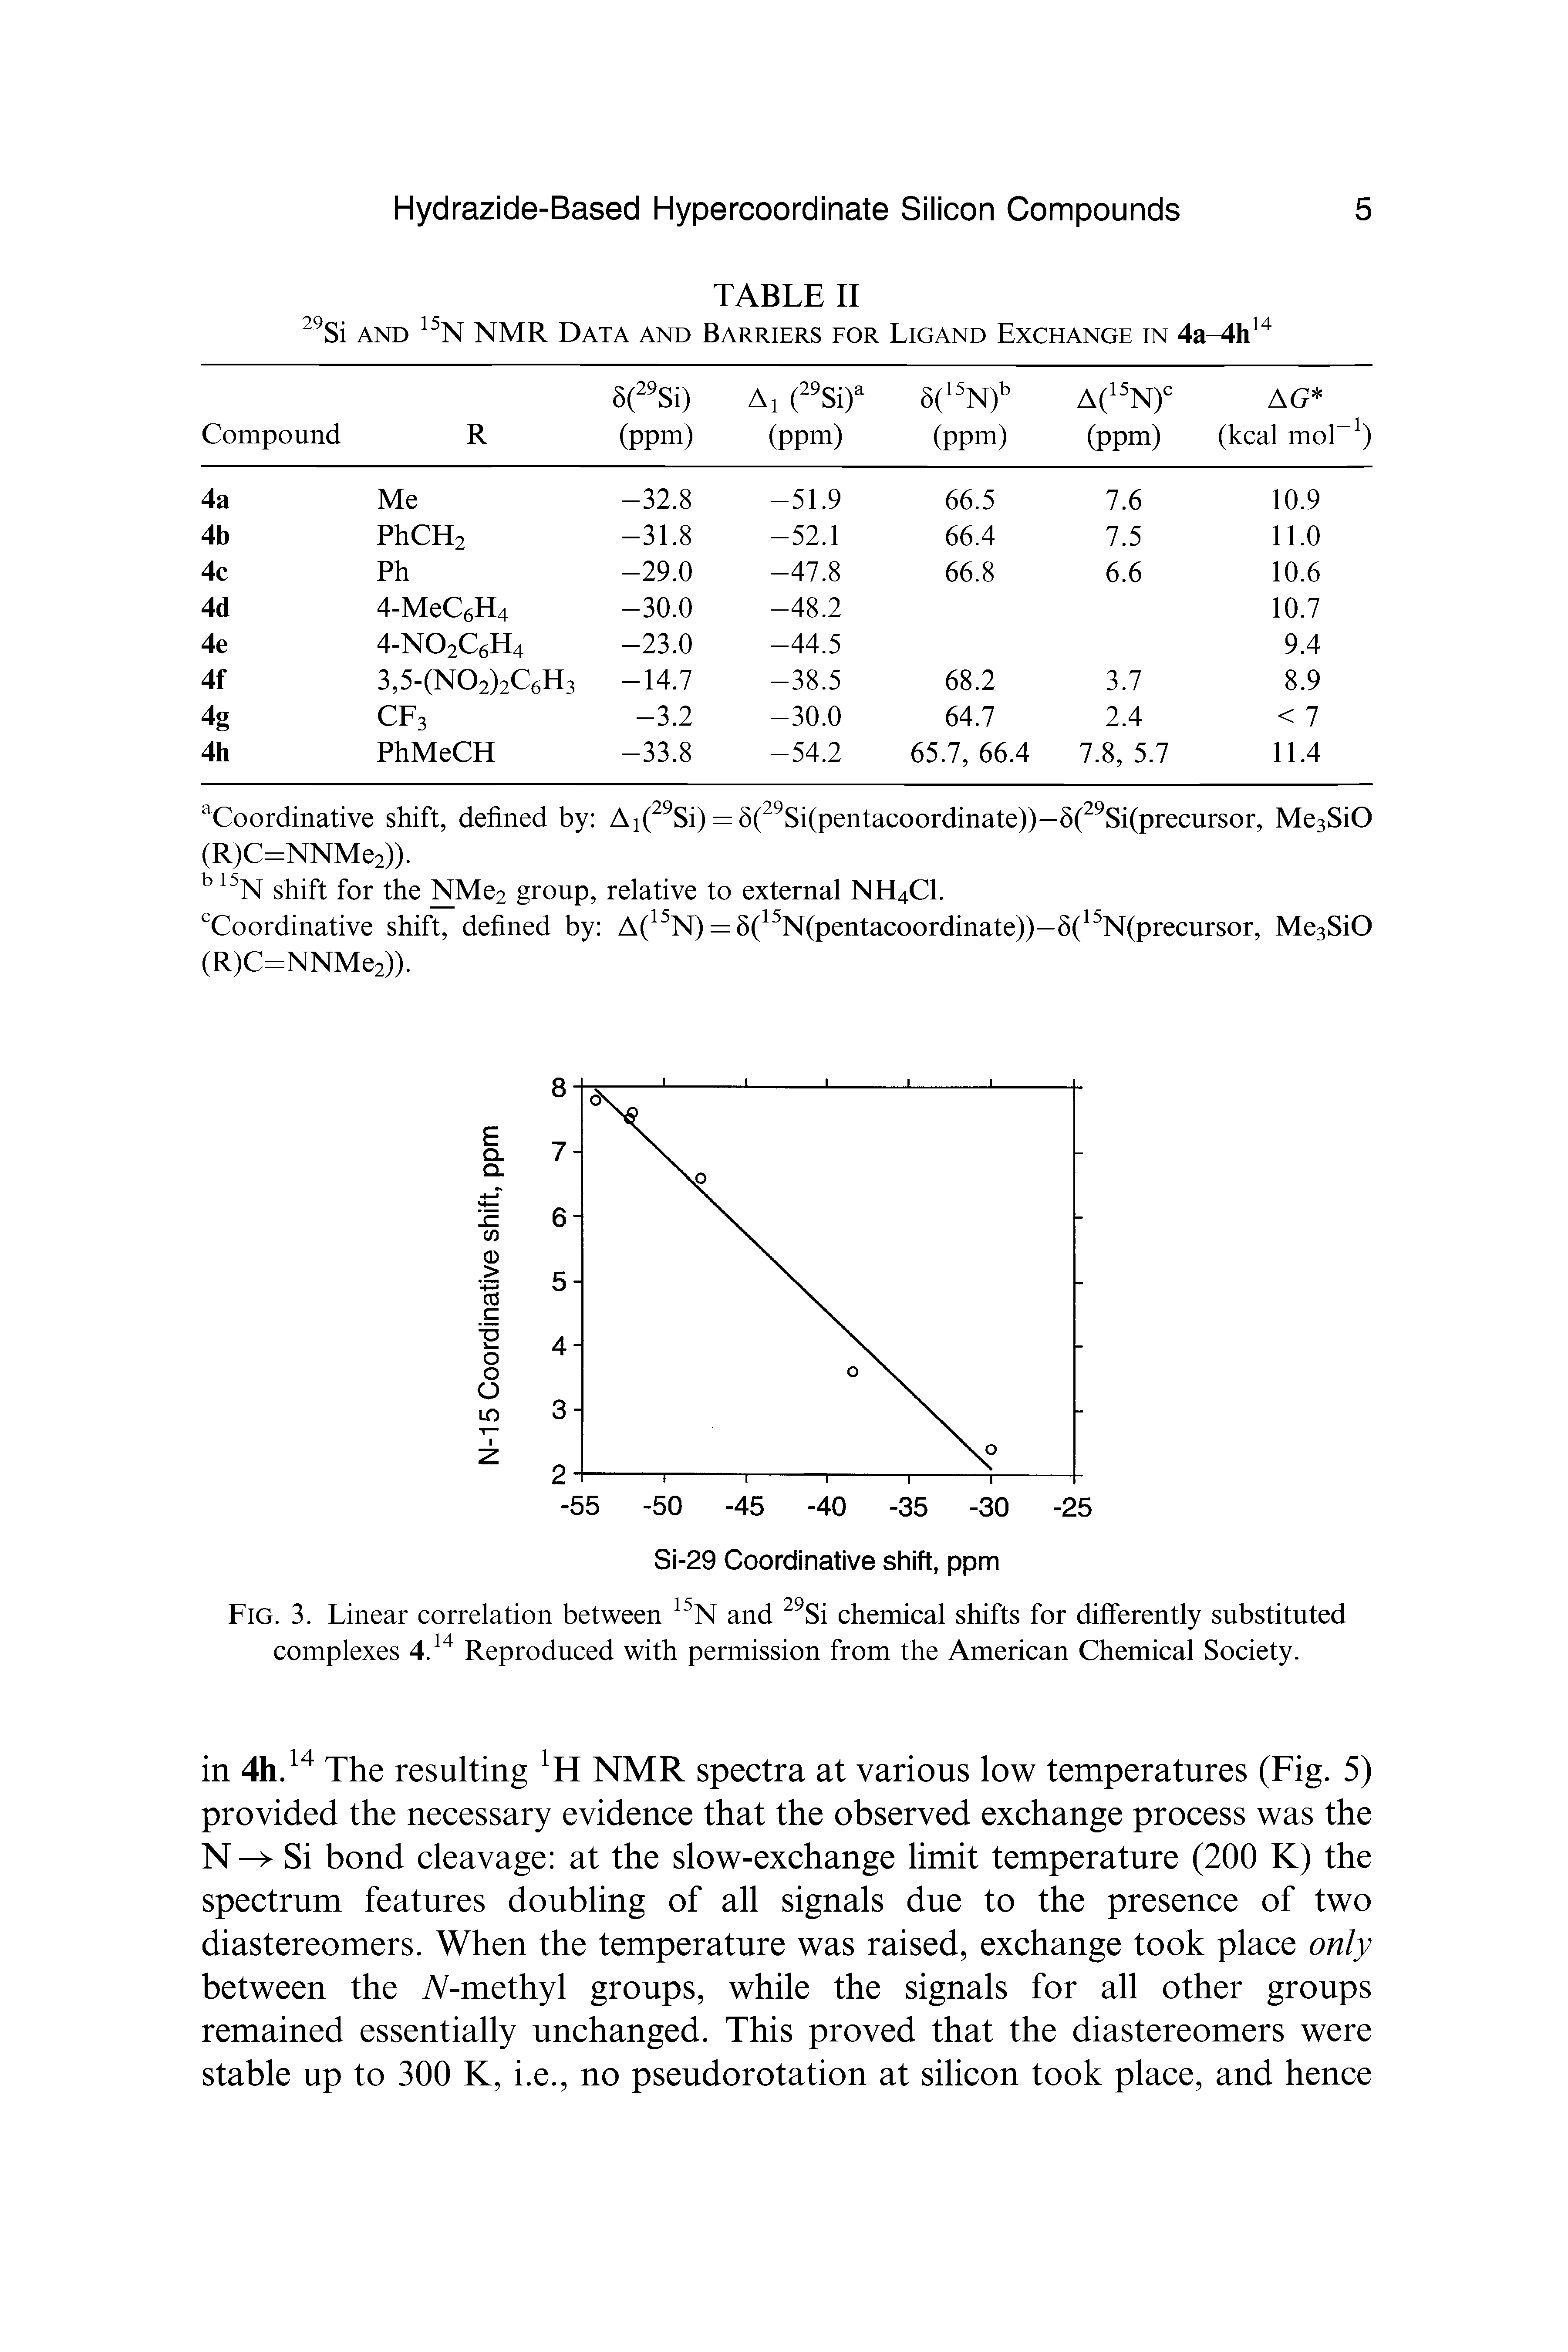 Fig. 3. Linear correlation between 15N and 29Si chemical shifts for differently substituted complexes 4.14 Reproduced with permission from the American Chemical Society.